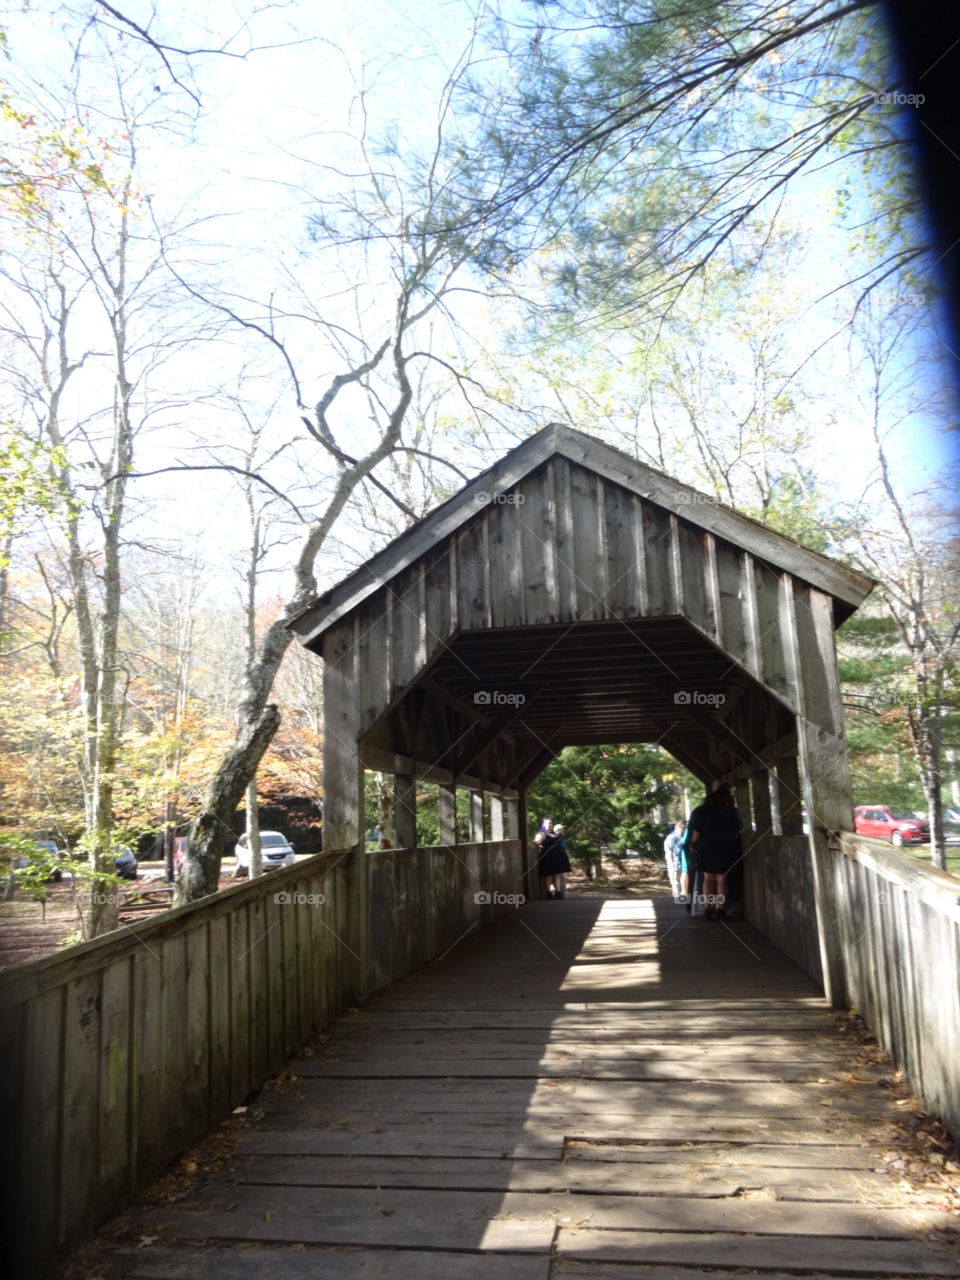 A covered bridge on a park trail in Connecticut.